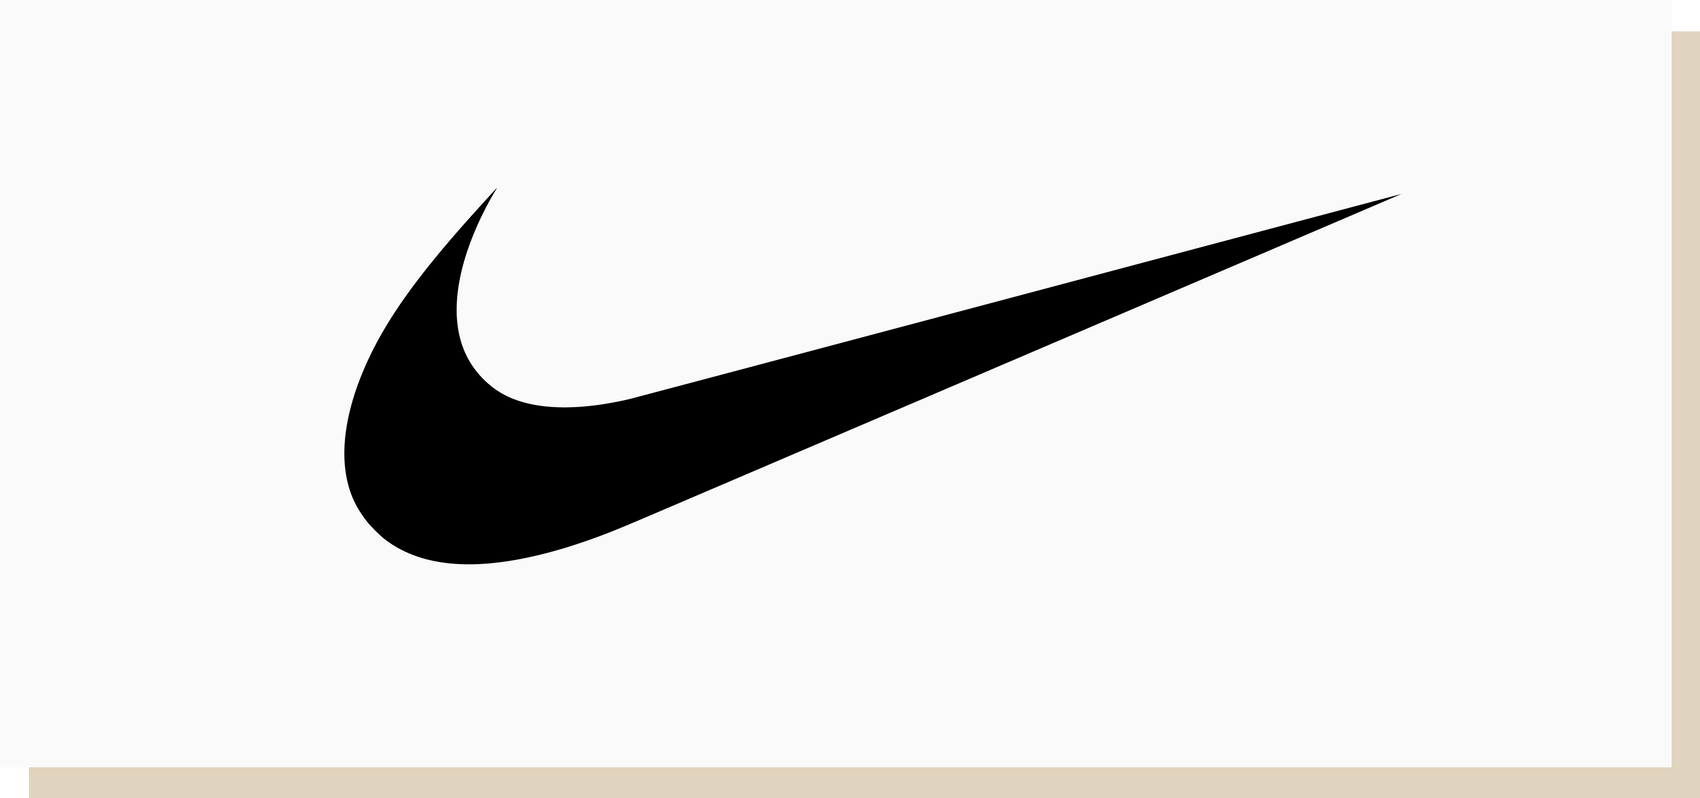 The best logos of all time (according to 11 design and marketing experts)